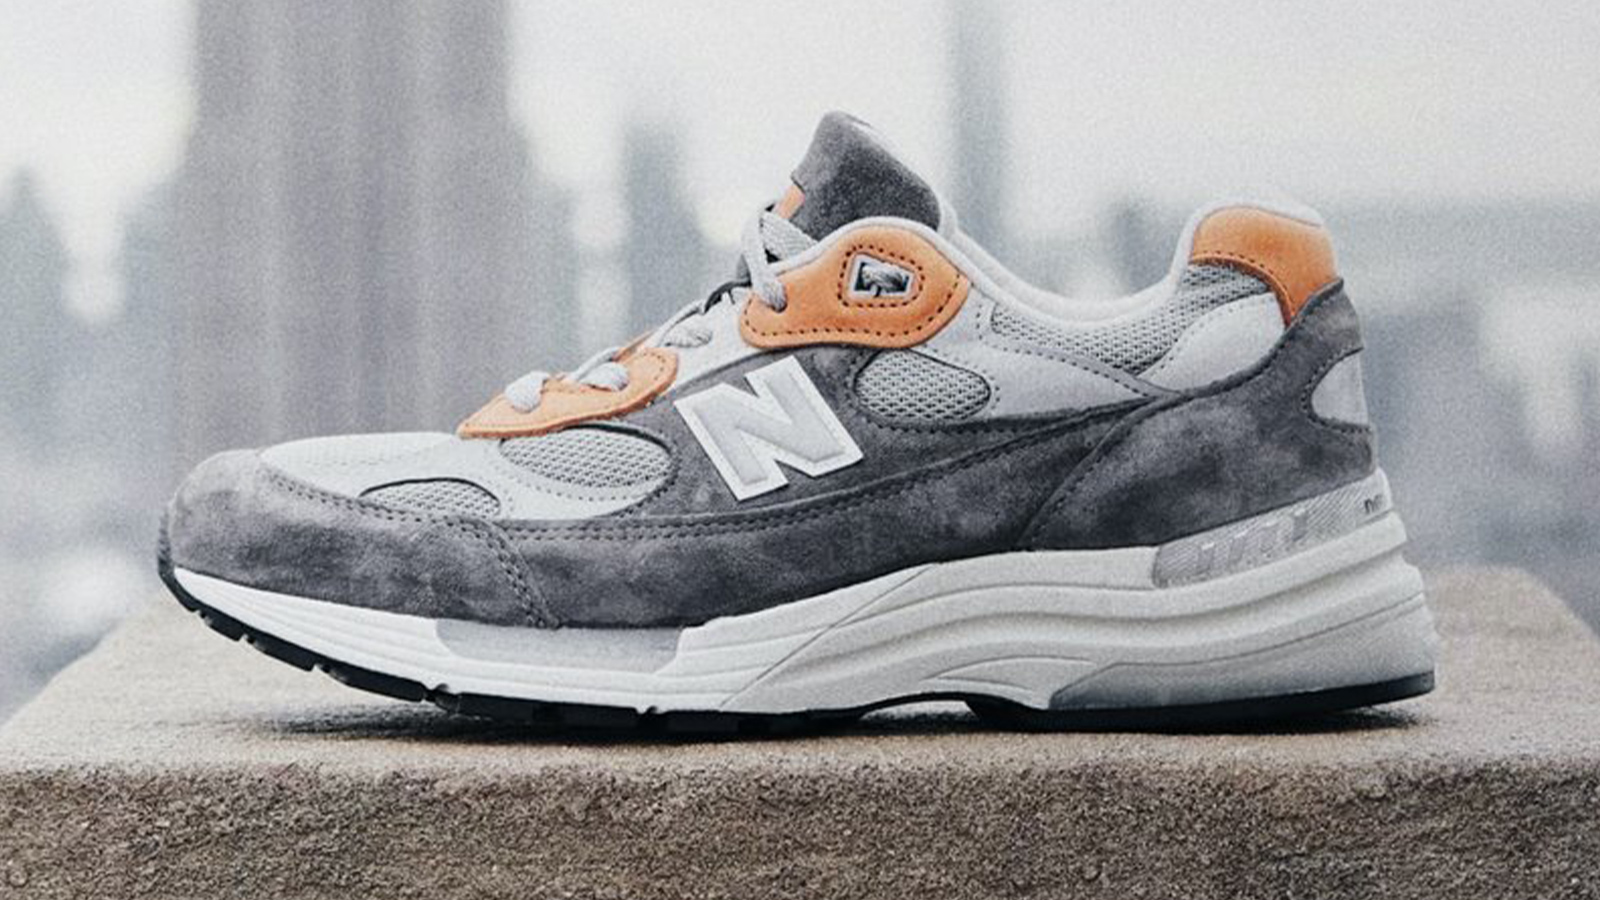 Todd Snyder x New Balance 992 10th Anniversary Limited Edition